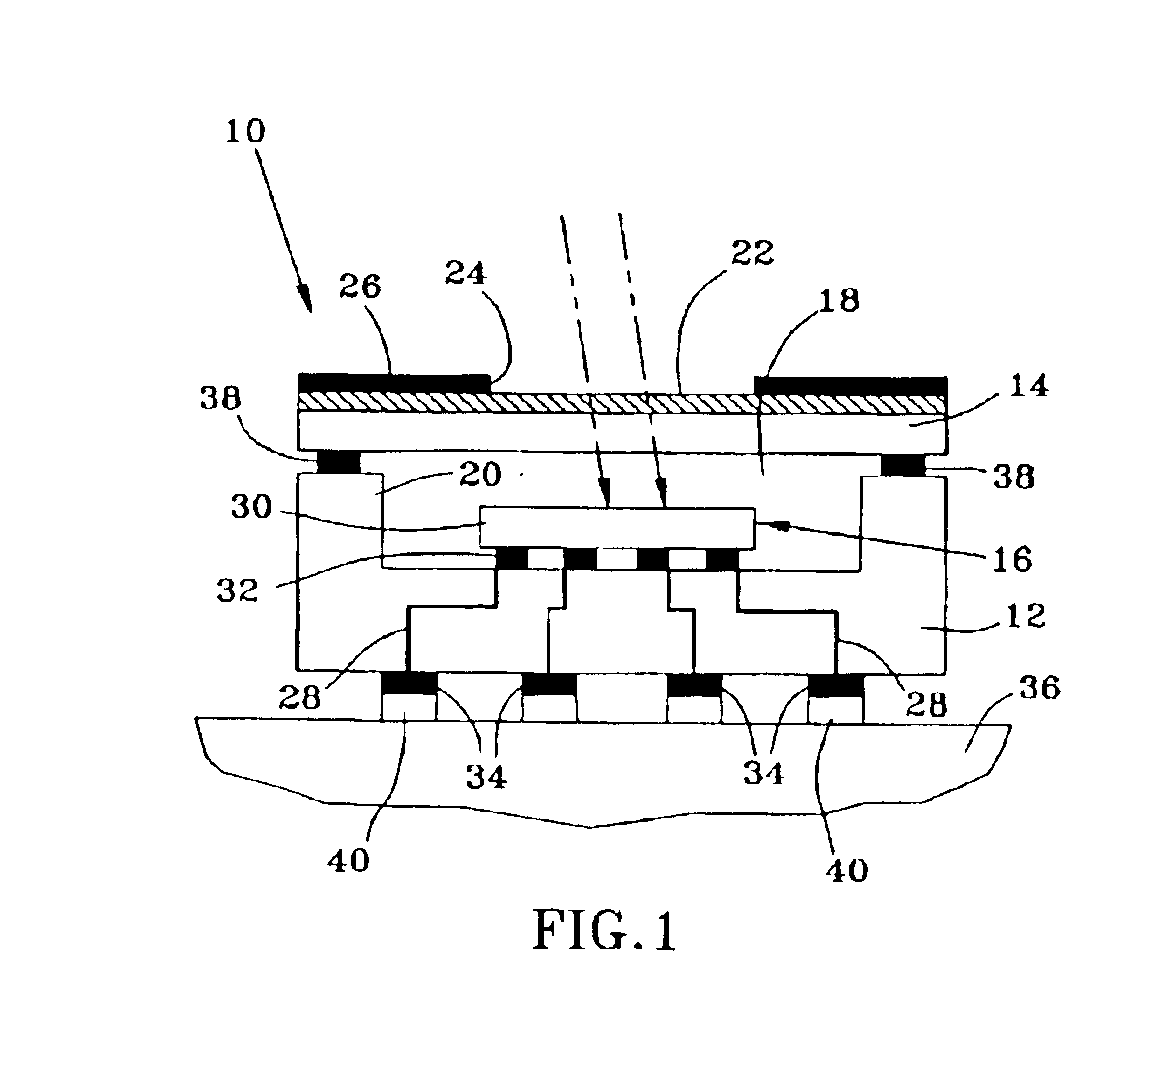 Surface-mount package for an optical sensing device and method of manufacture